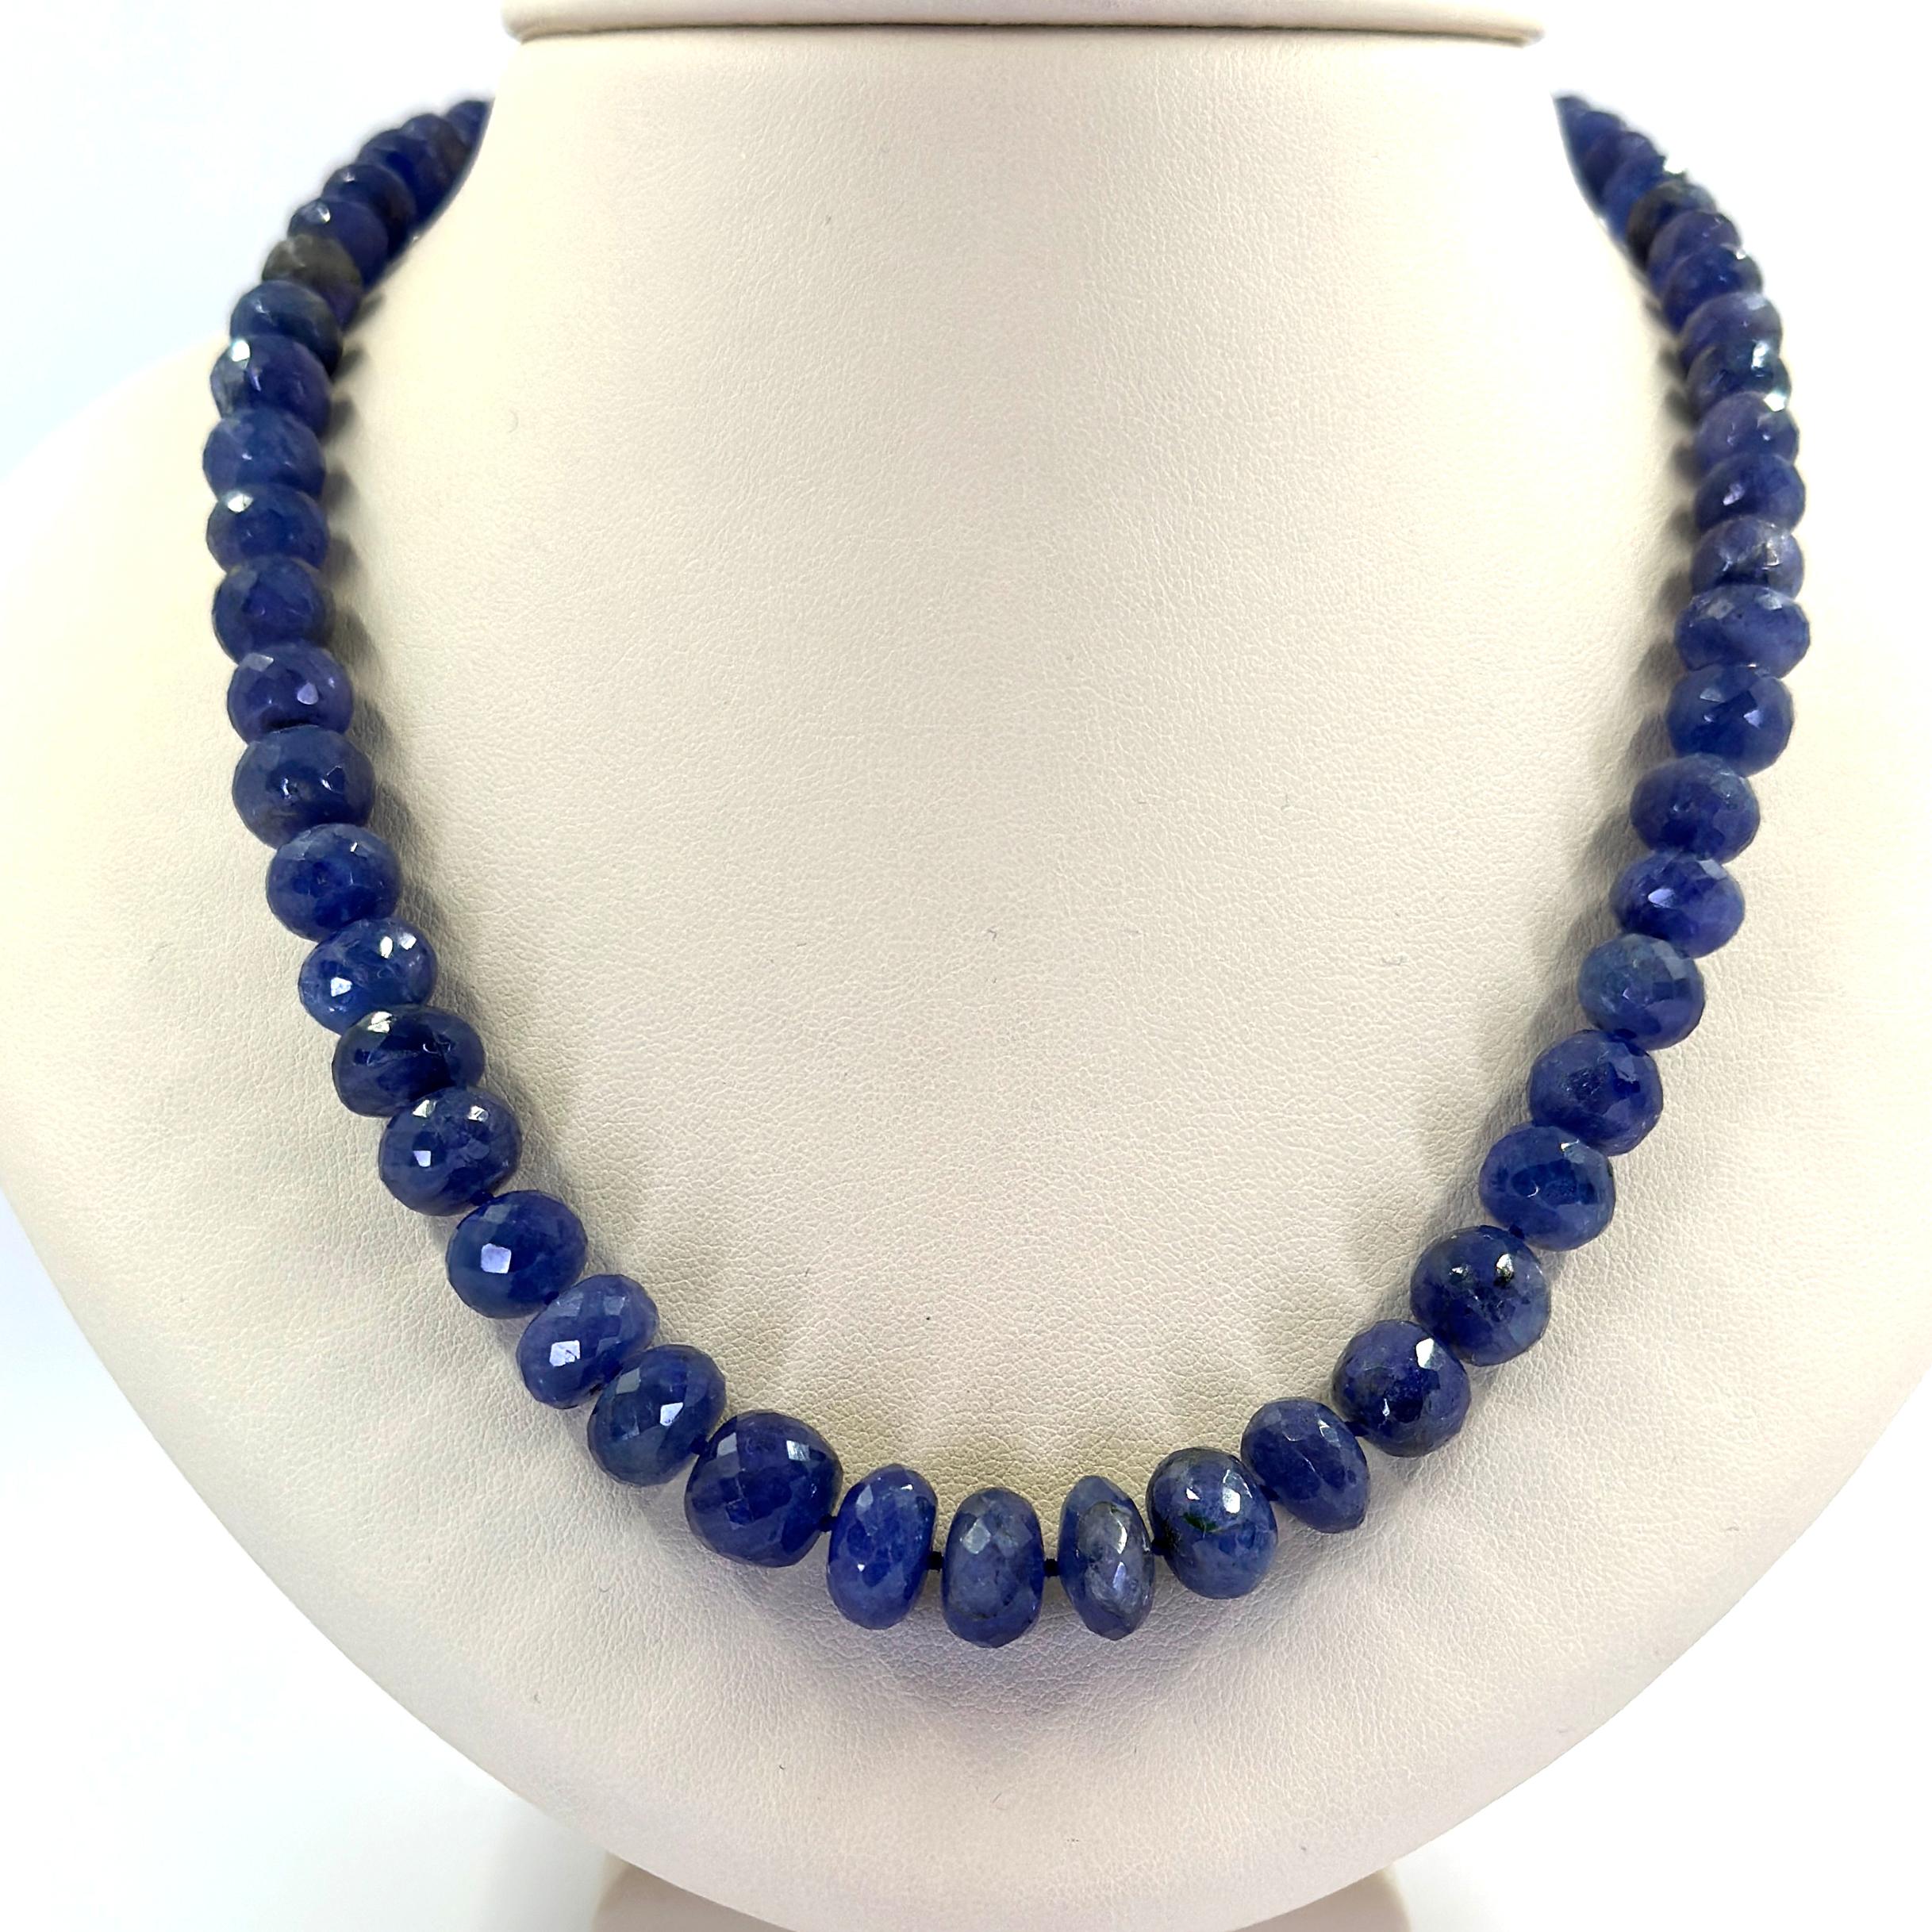 245 Carat Total Weight Faceted Tanzanite Bead Necklace Featuring a 14 Karat Yellow Gold Pearl Clasp. 72 Beads Measure 6-10mm and 18 Inches Long.